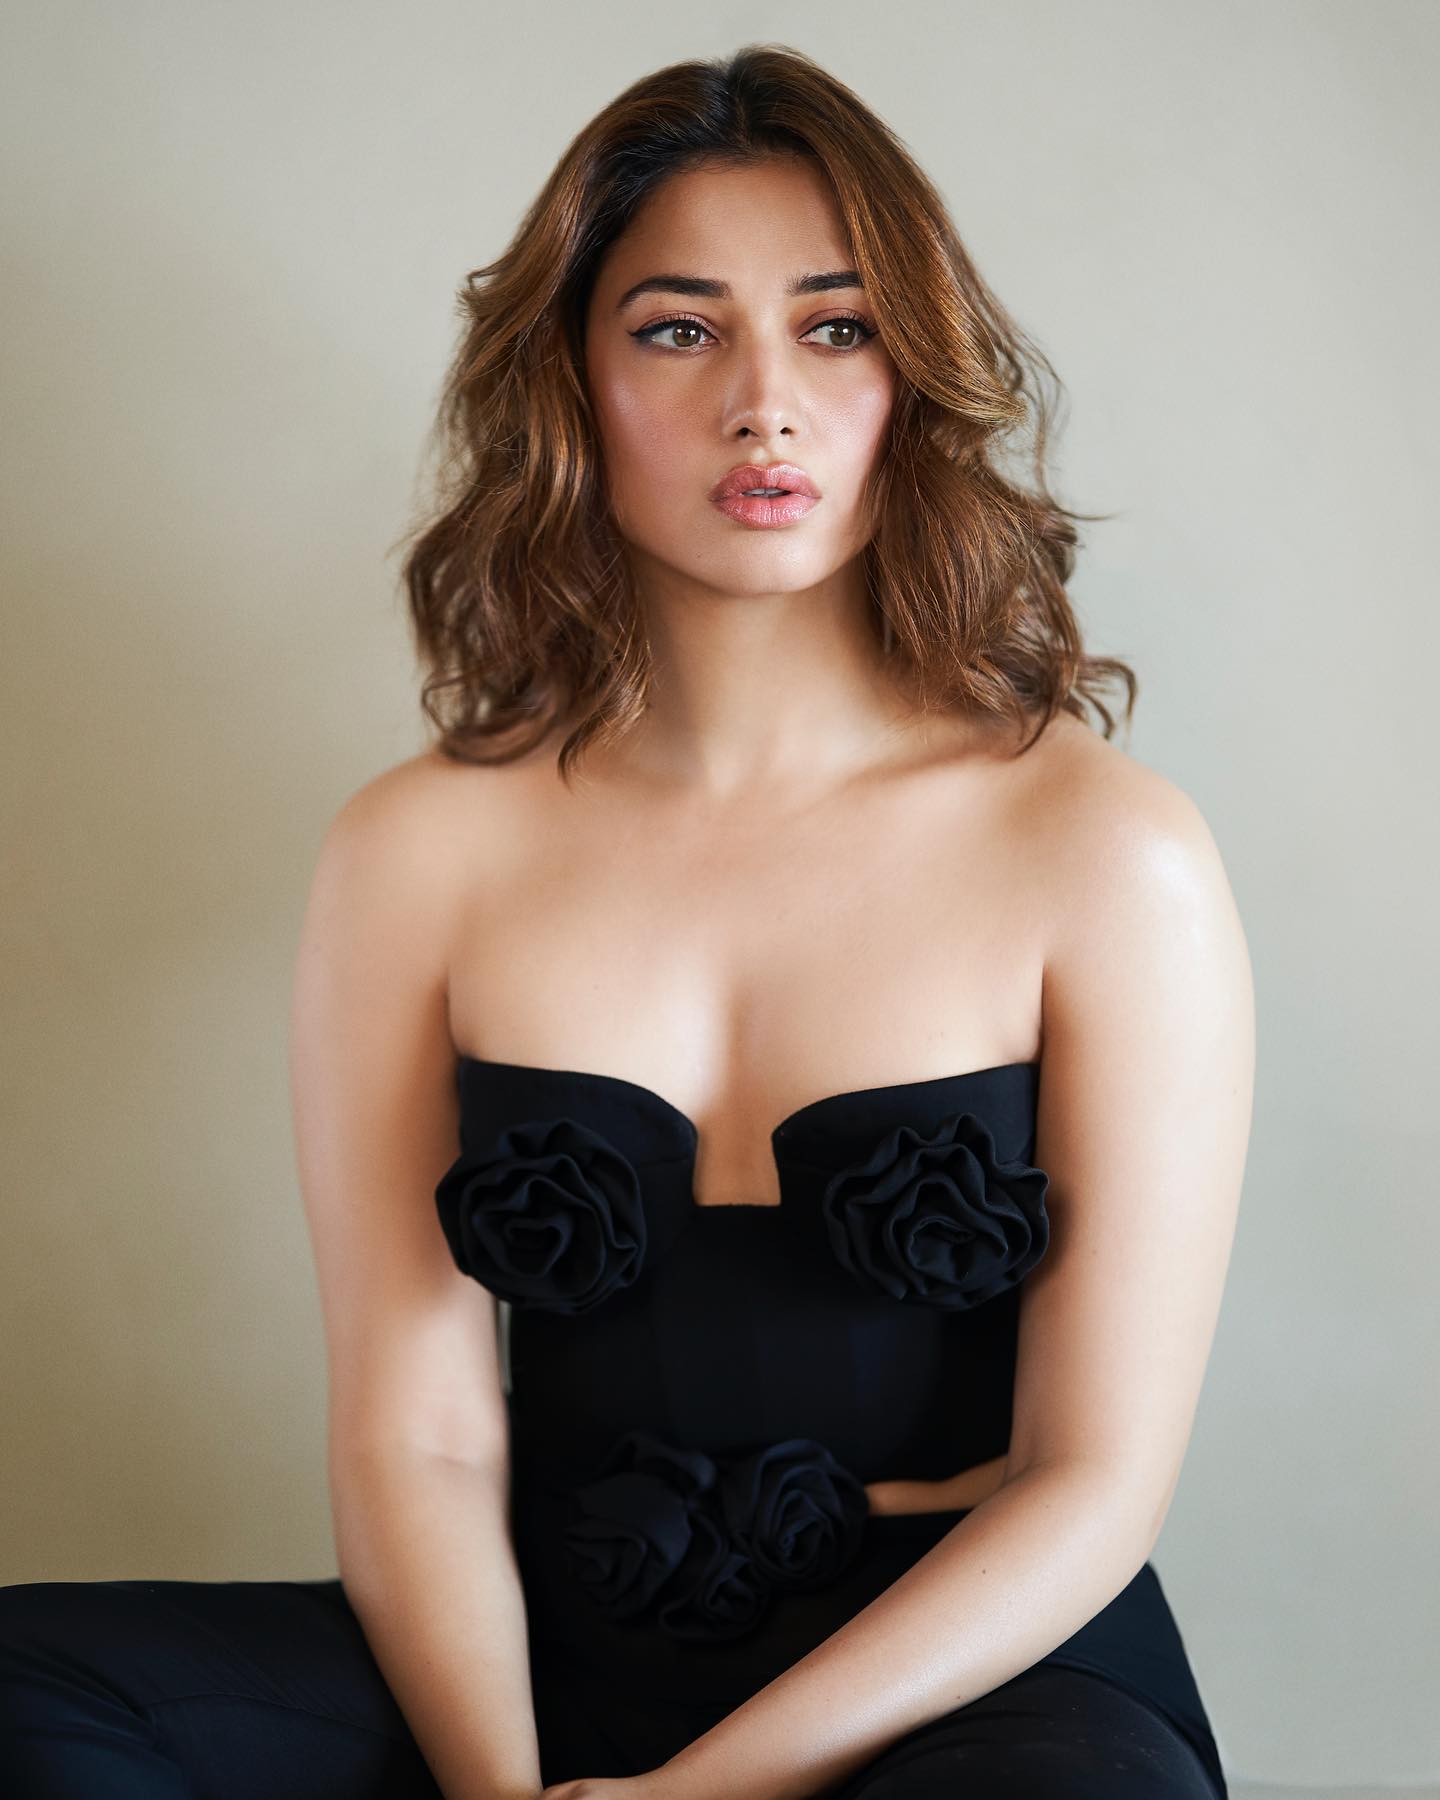 Tamannaah Bhatia in a Shiny Black Outfit